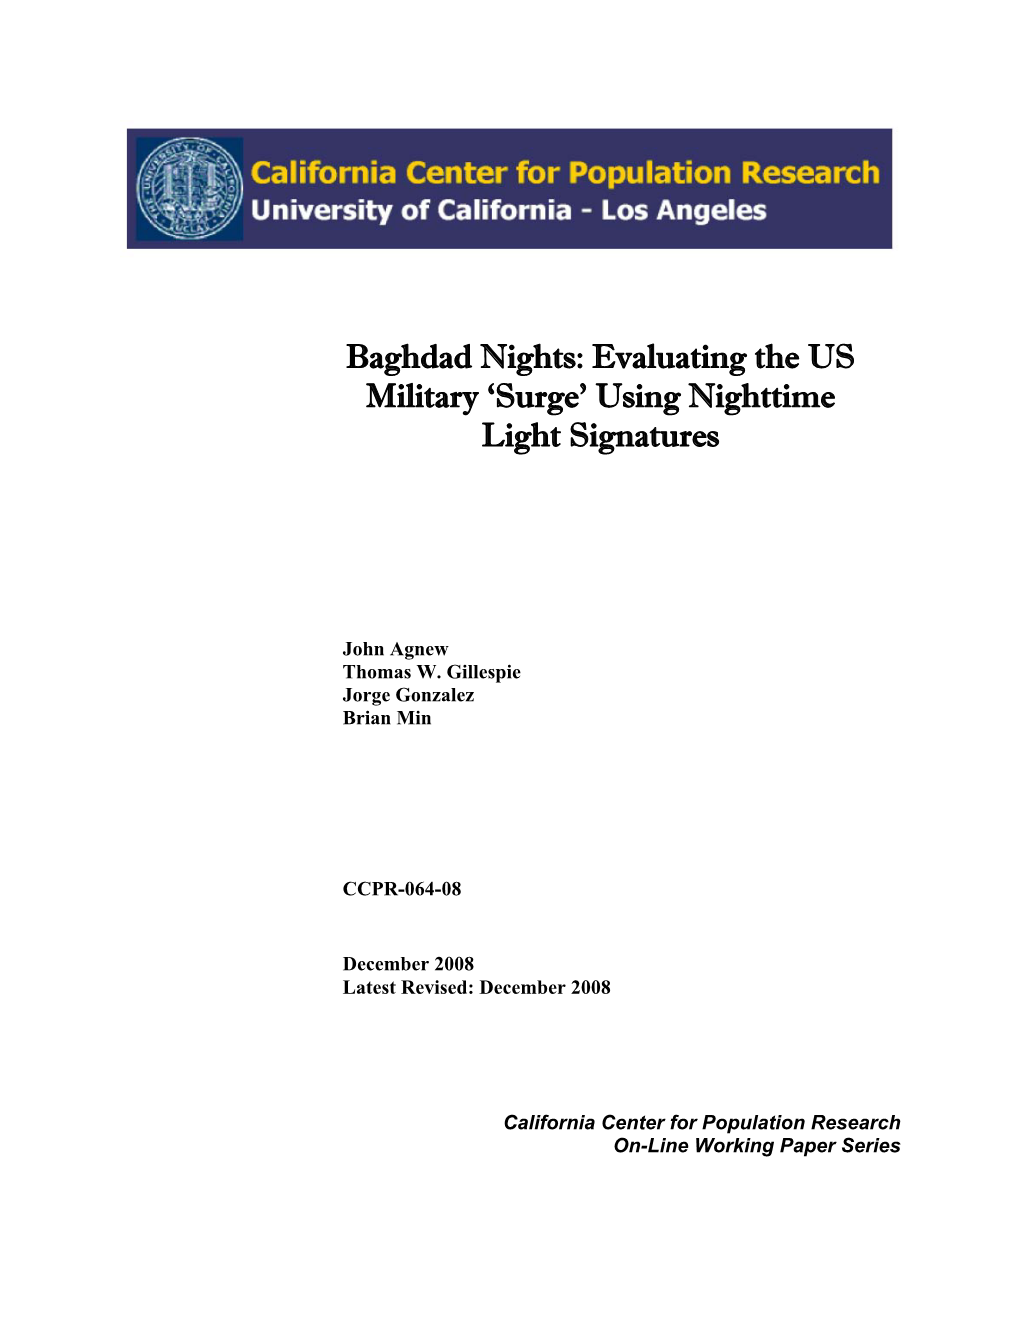 Evaluating the US Military 'Surge' Using Nighttime Light Signatures